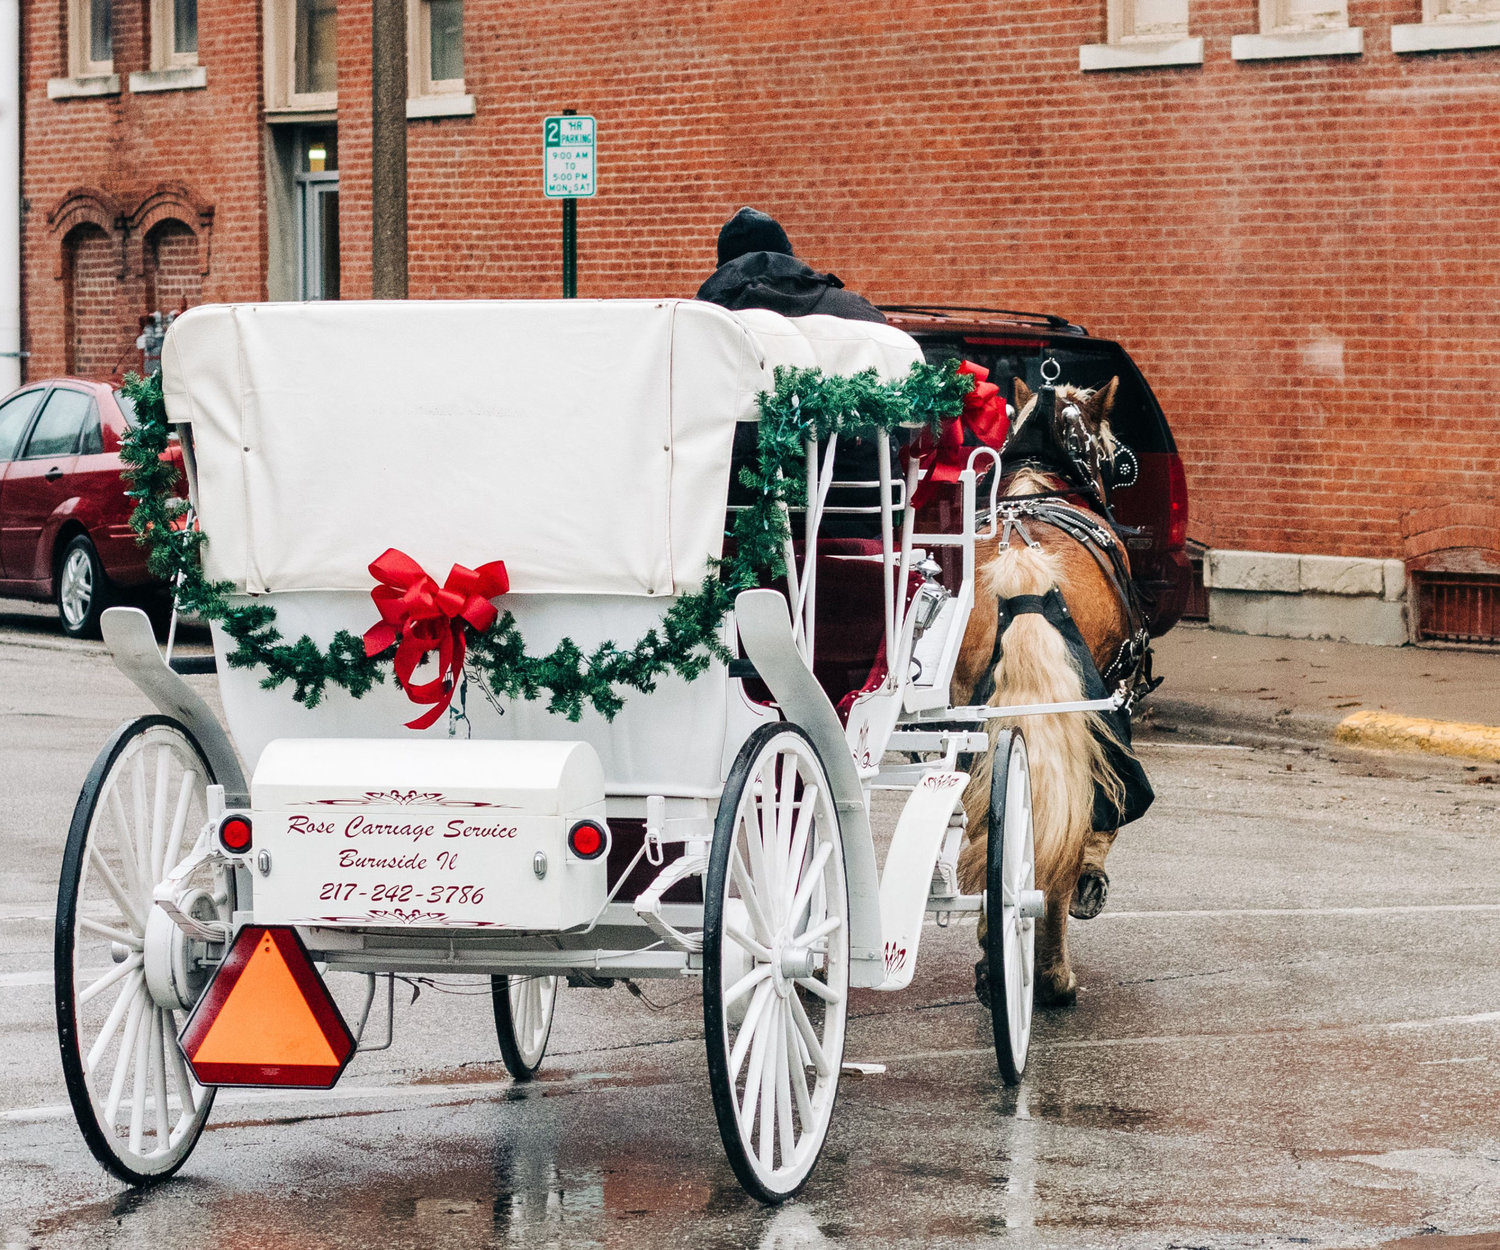 Carriage rides are once again a part of the Mistletoe on Main to be held Saturday in downtown Fort Madison. Live reindeer will also be a part of this year's annual holiday event.